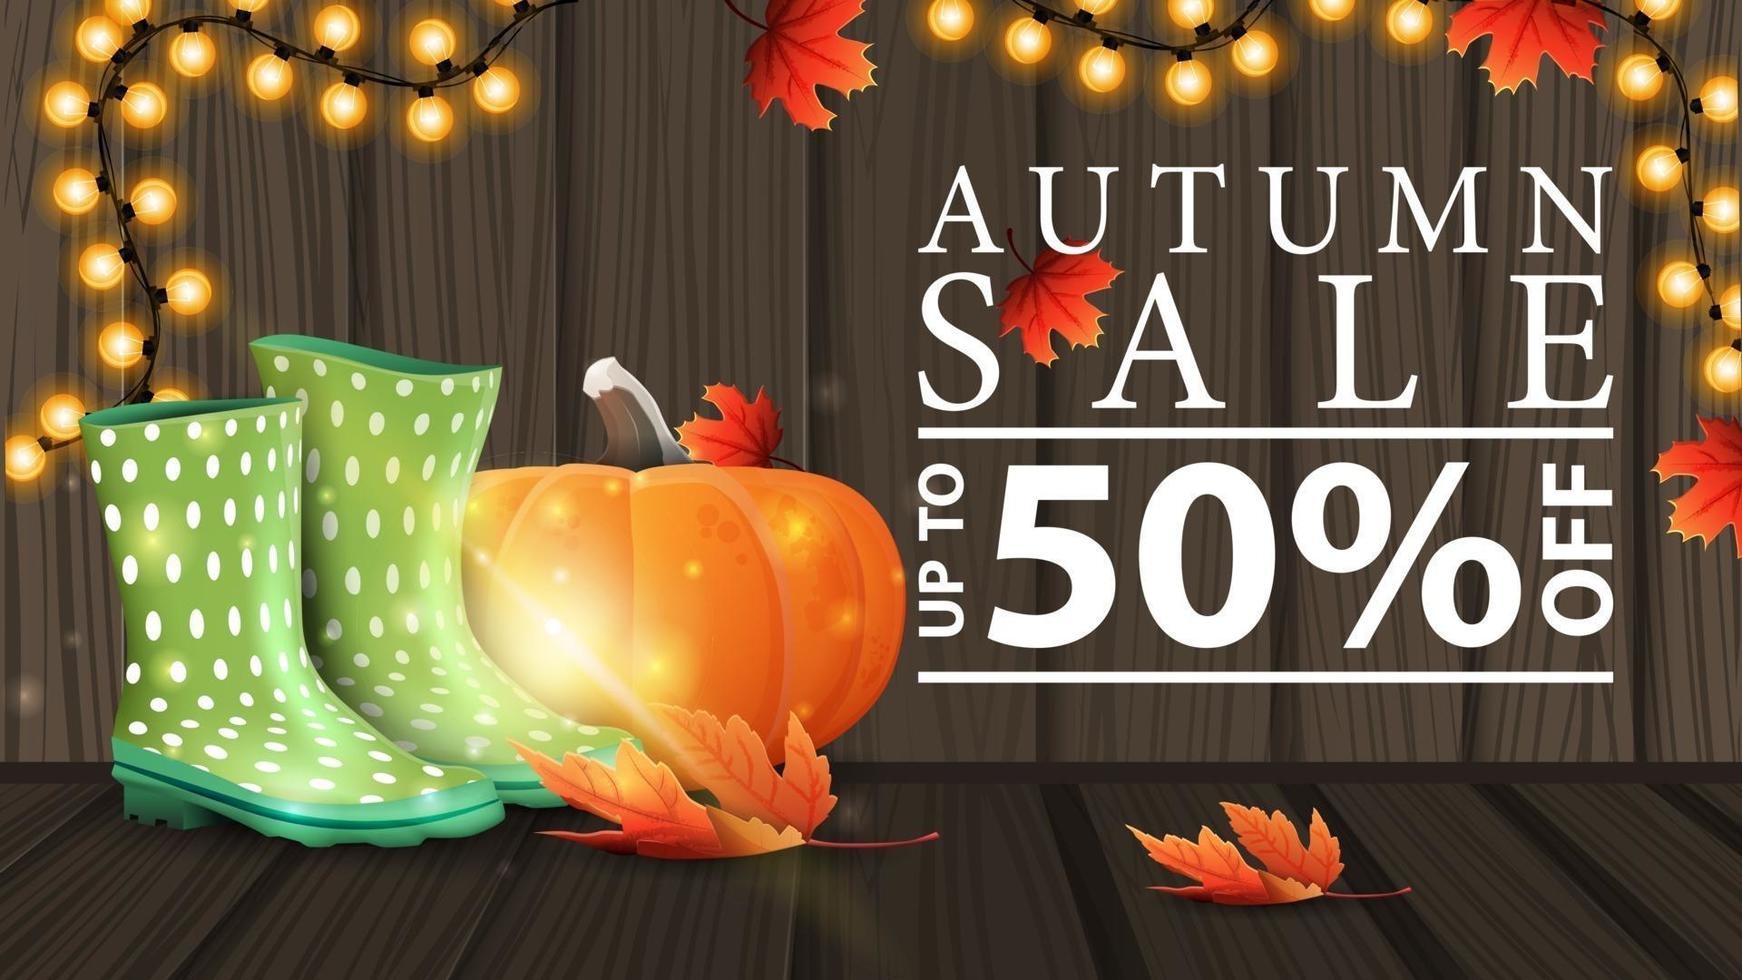 Autumn sale, discount web banner with wooden texture and garland vector